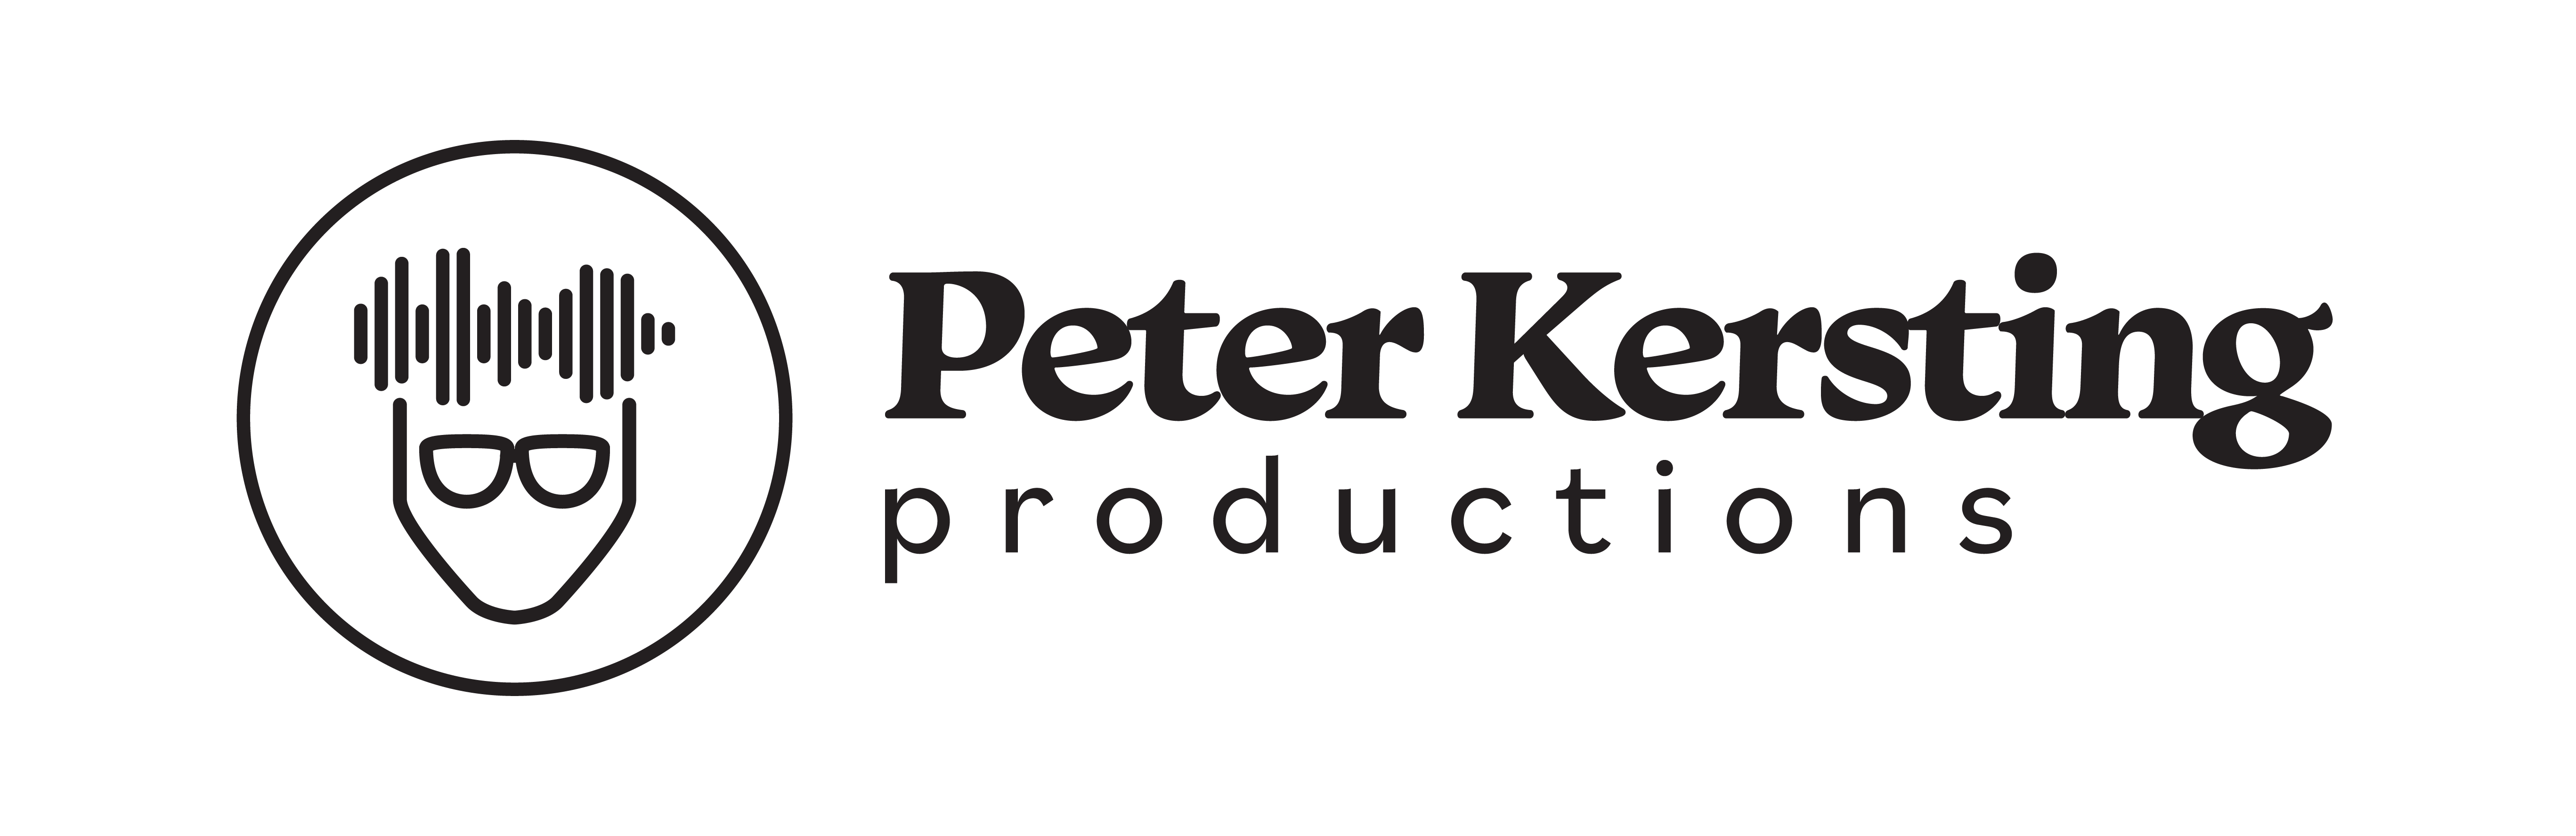 Peter Kersting Productions